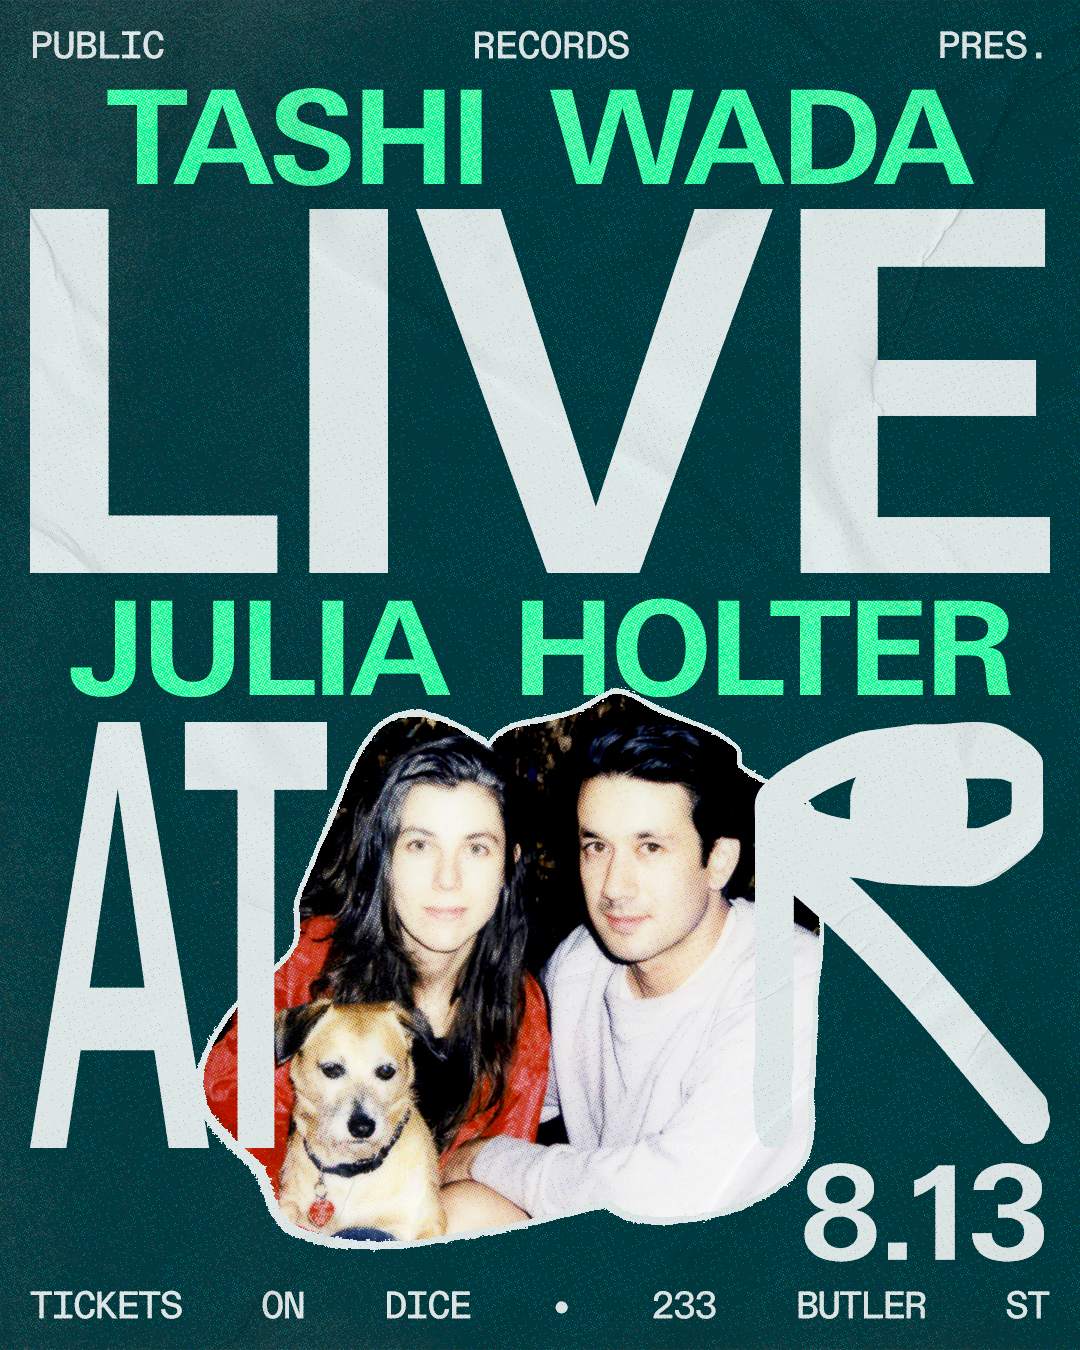 Tashi Wada with special guest Julia Holter - フライヤー表